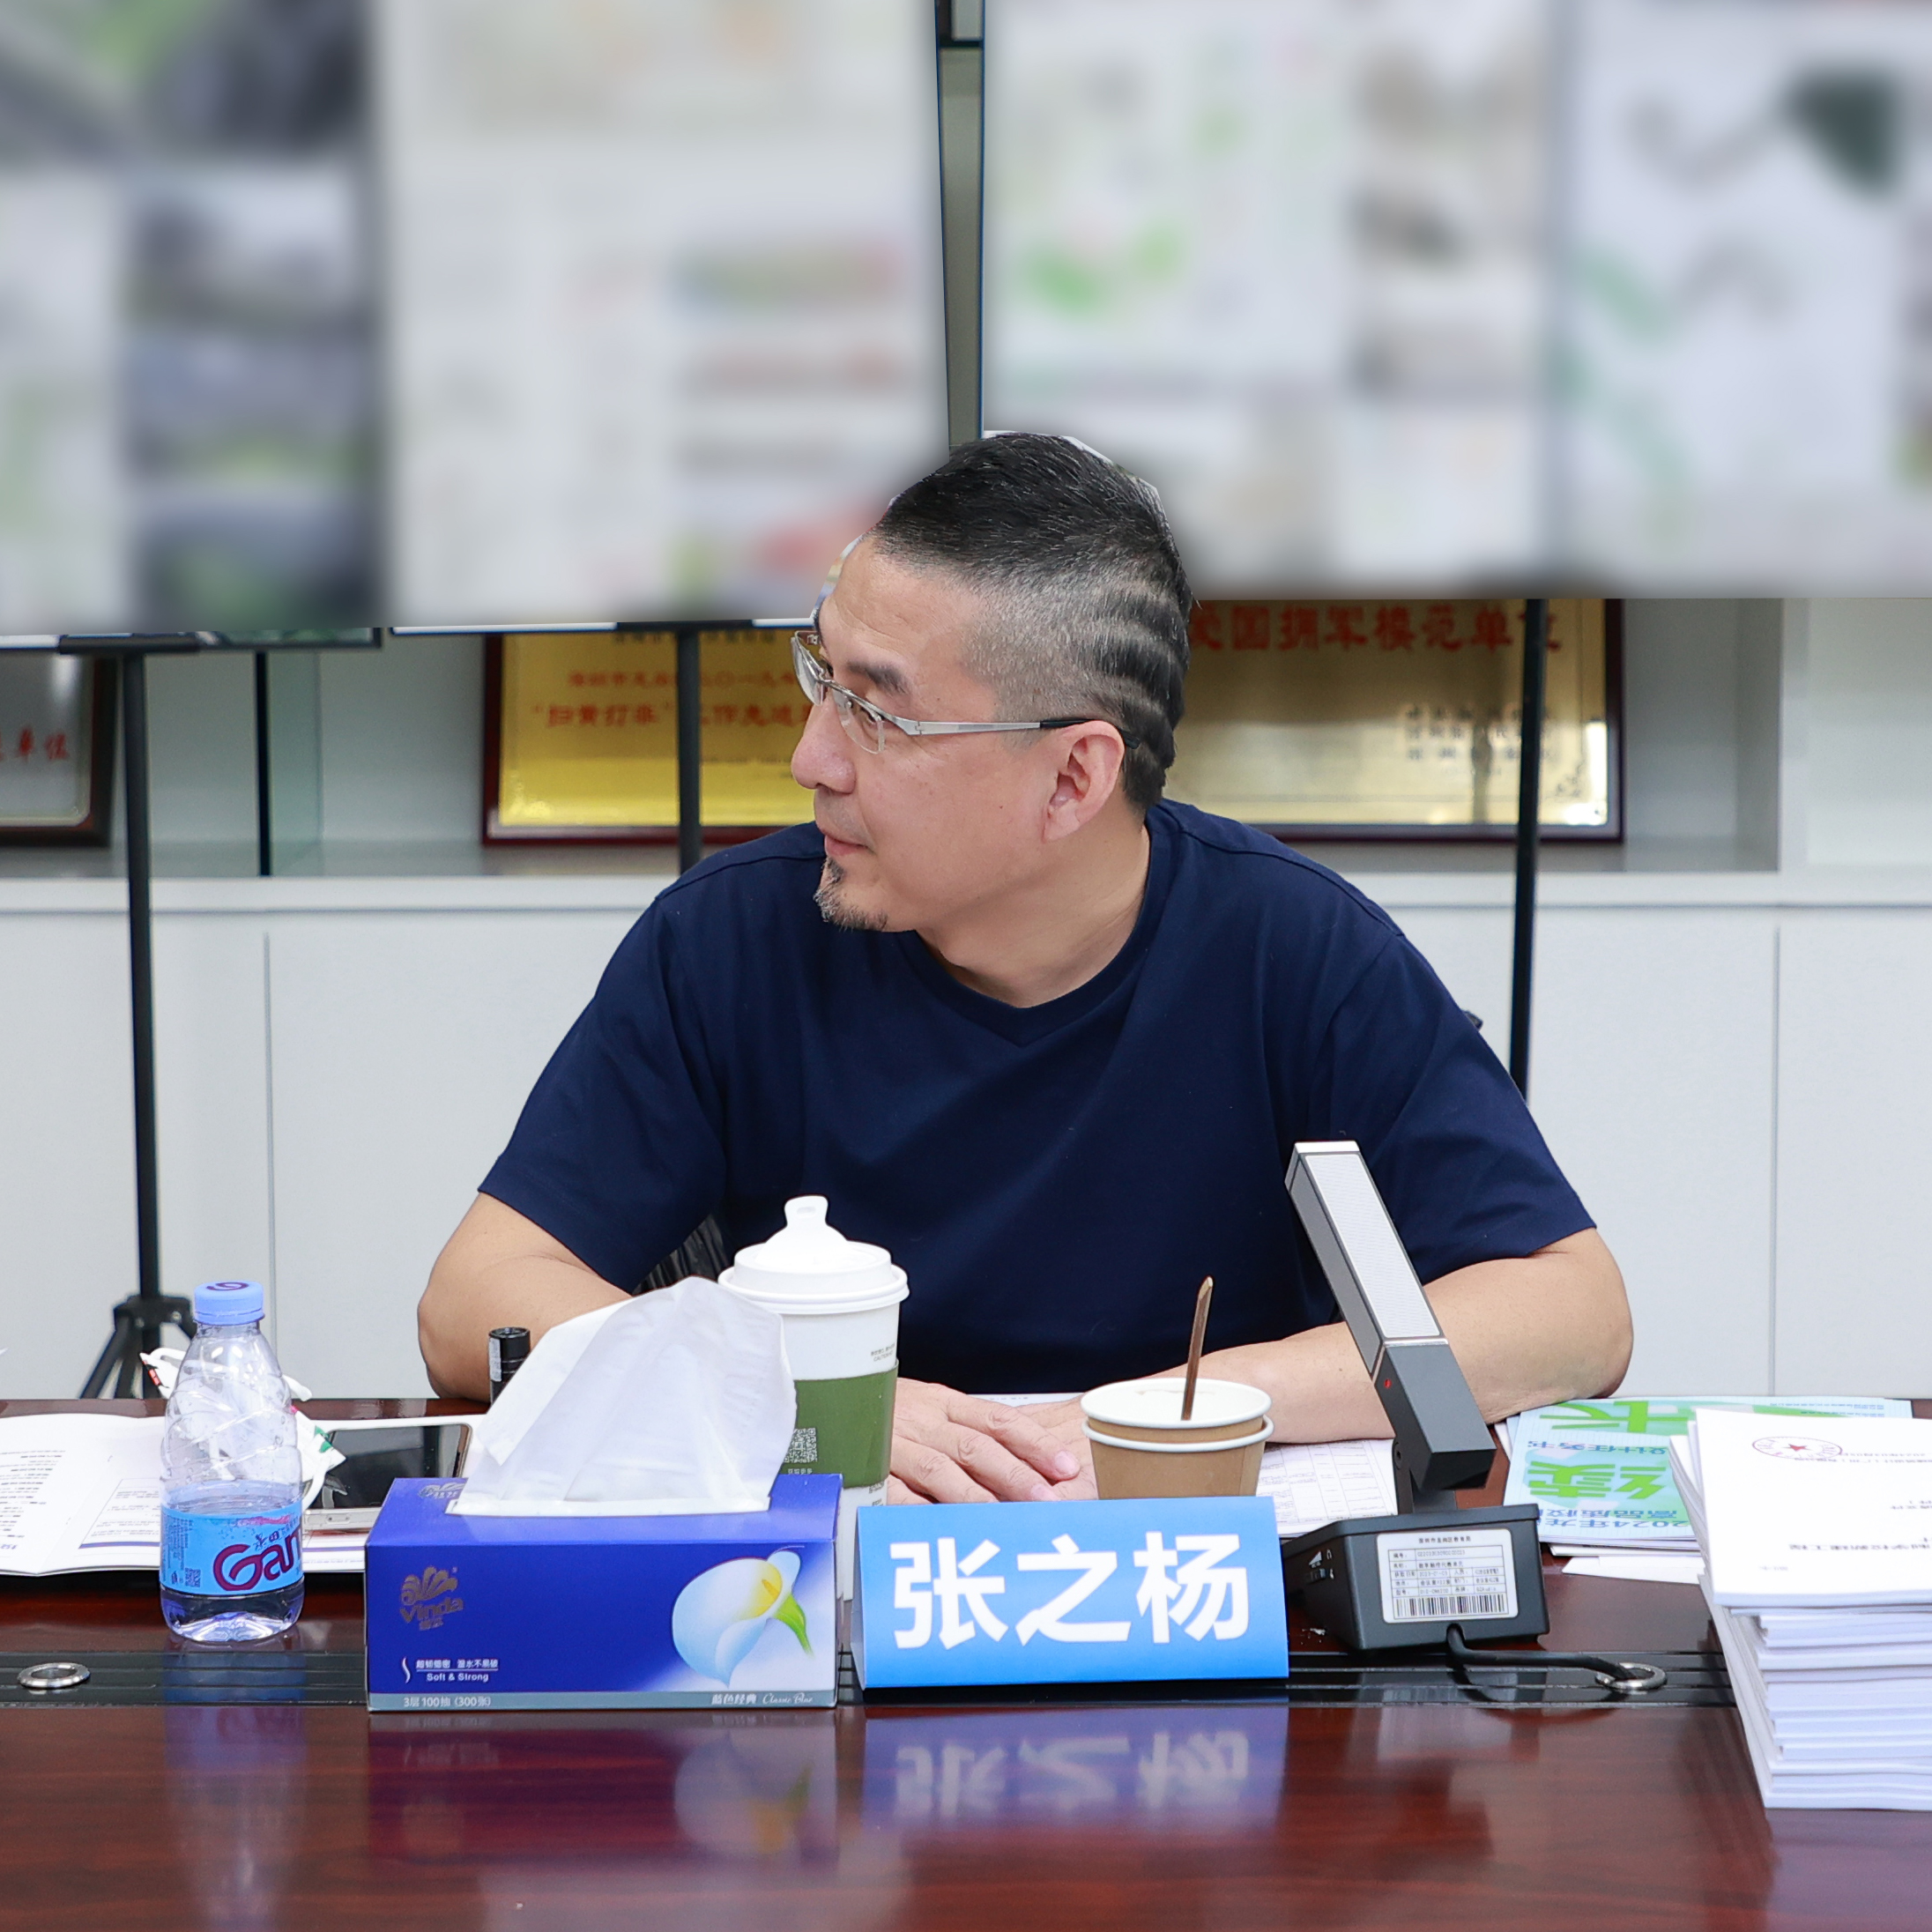 Zhang Zhiyang is the group leader of the prequalification Review Committee for 